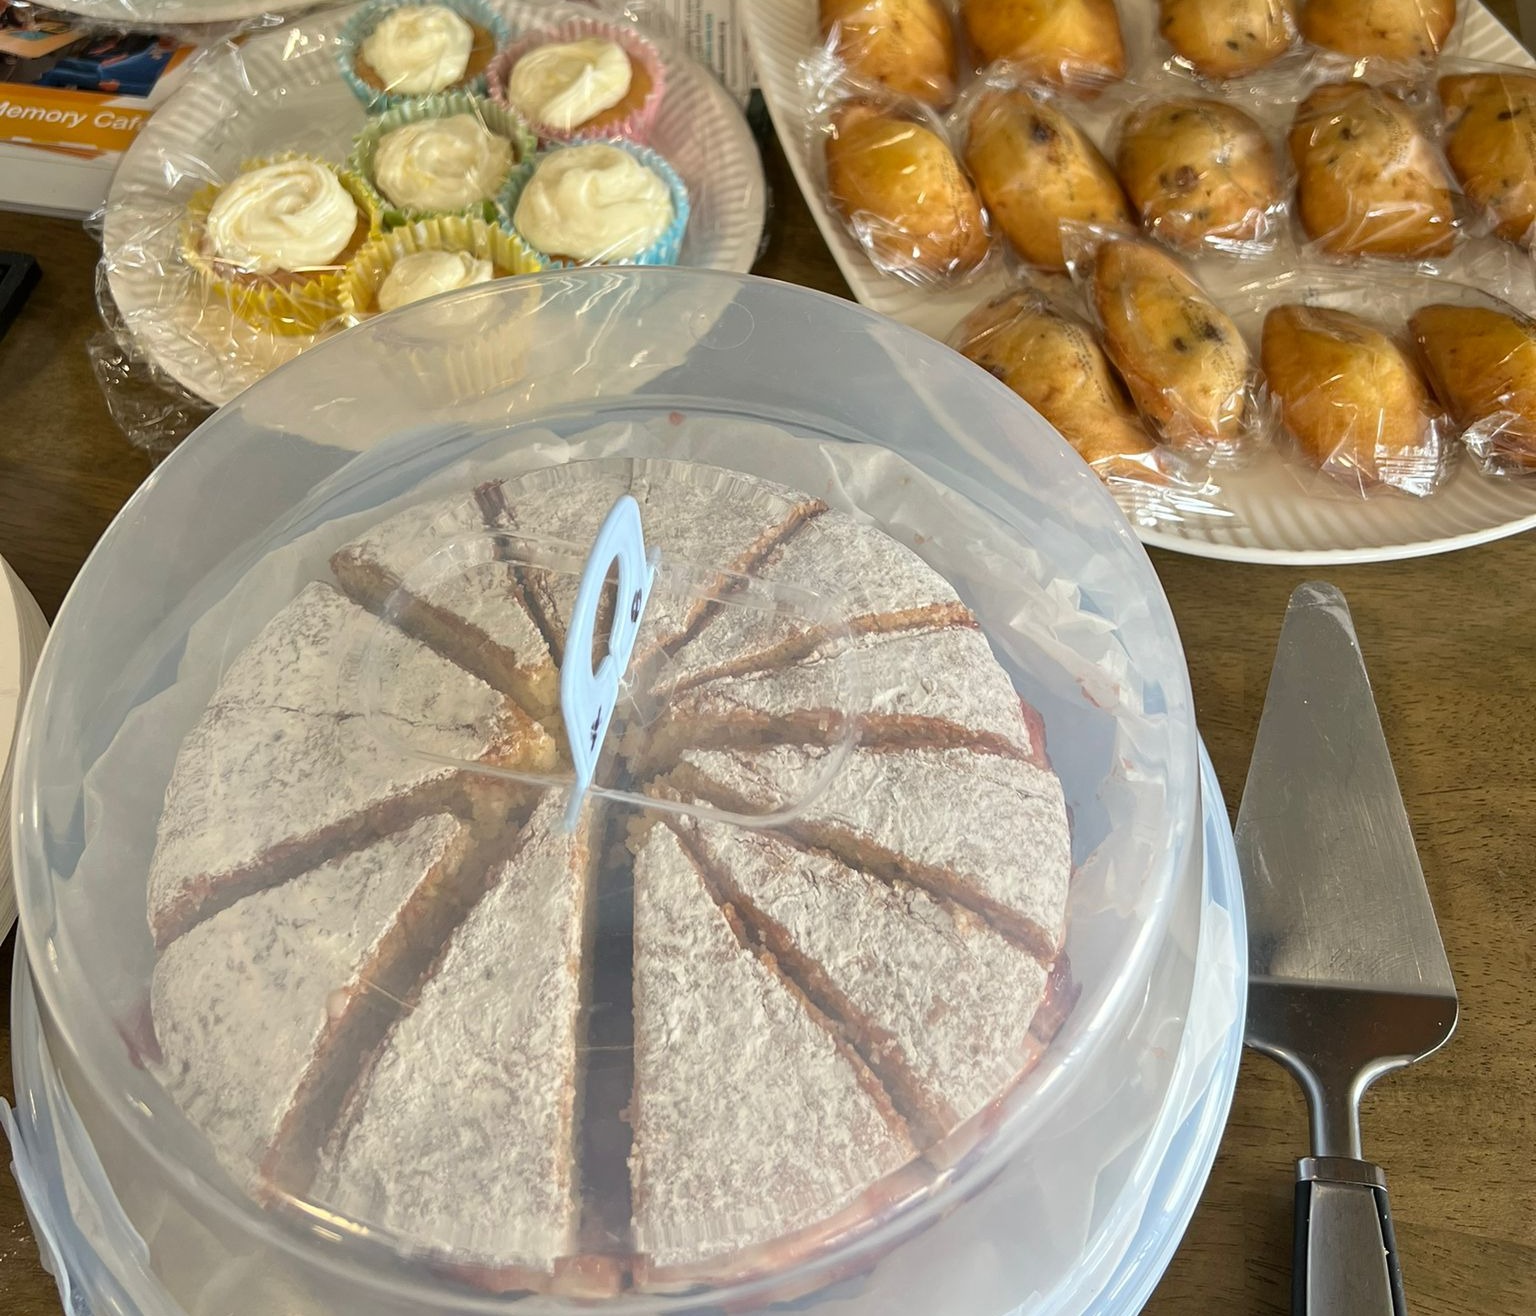 Cakes kindly donated by Ann Brownlow and Anne Taylor